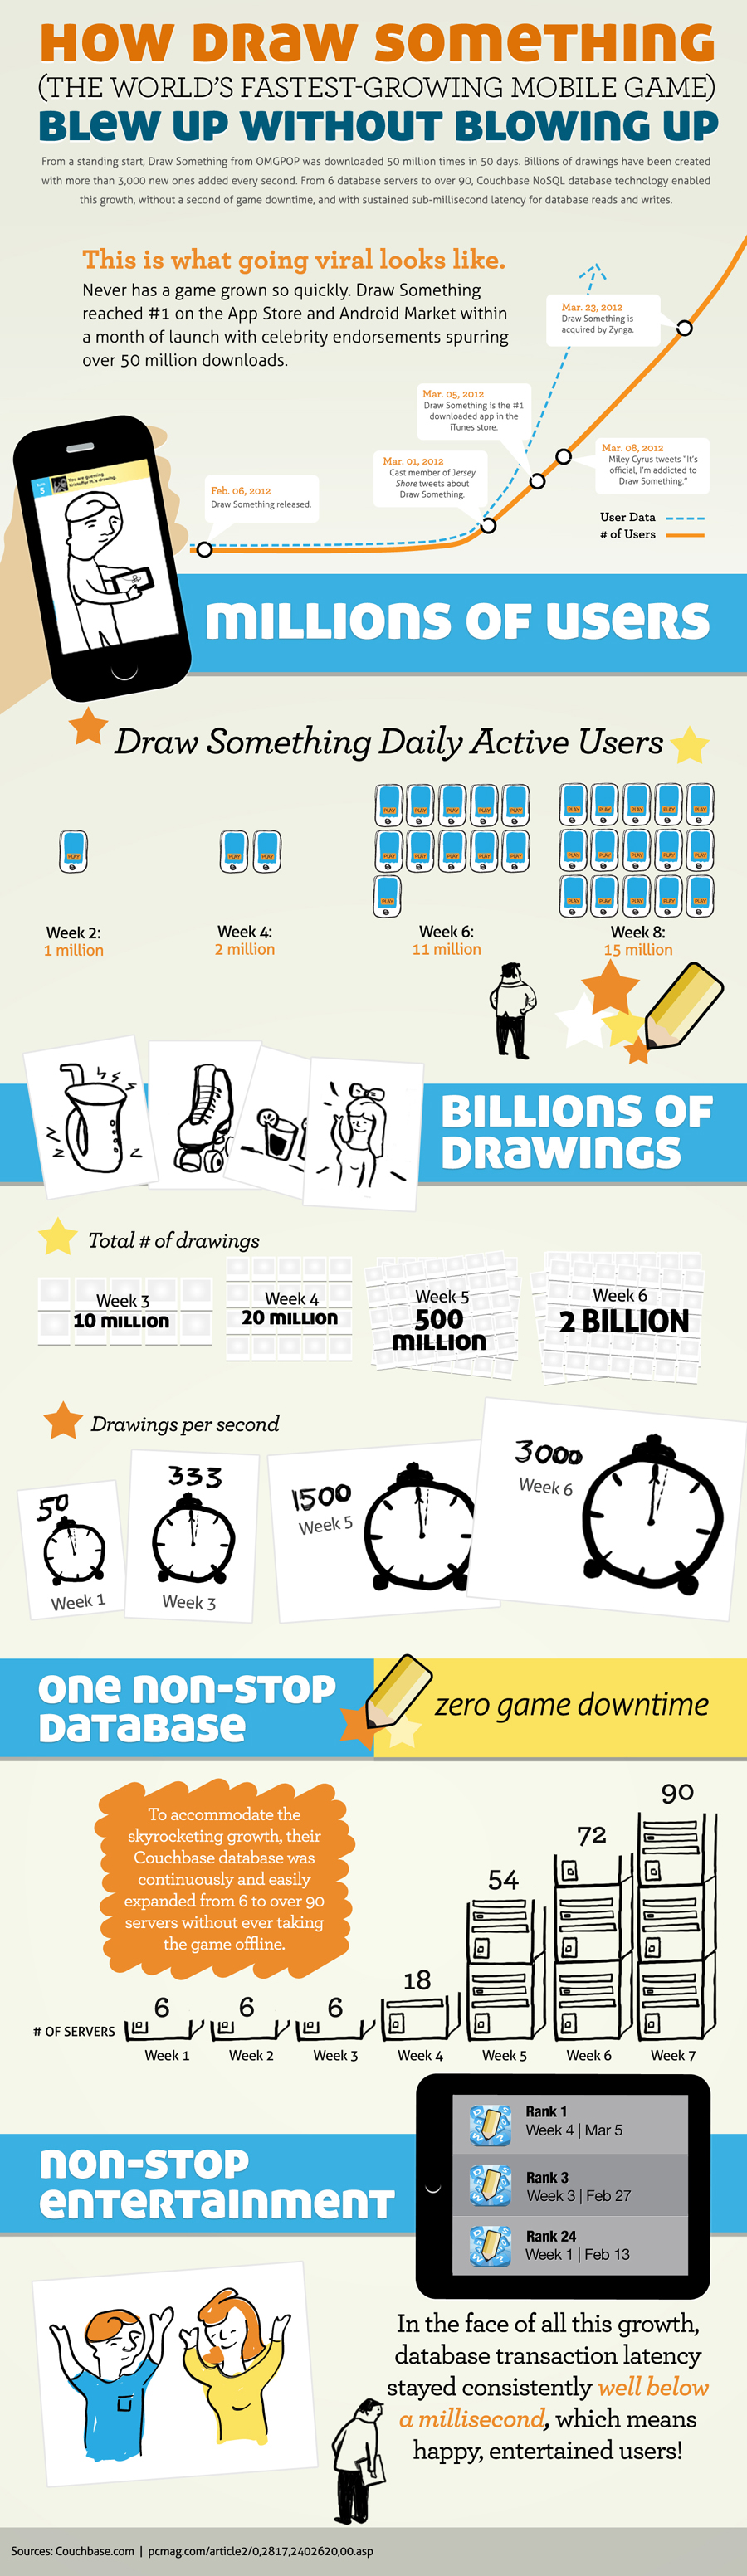 How “Draw Something” Blew Up Without Blowing Up